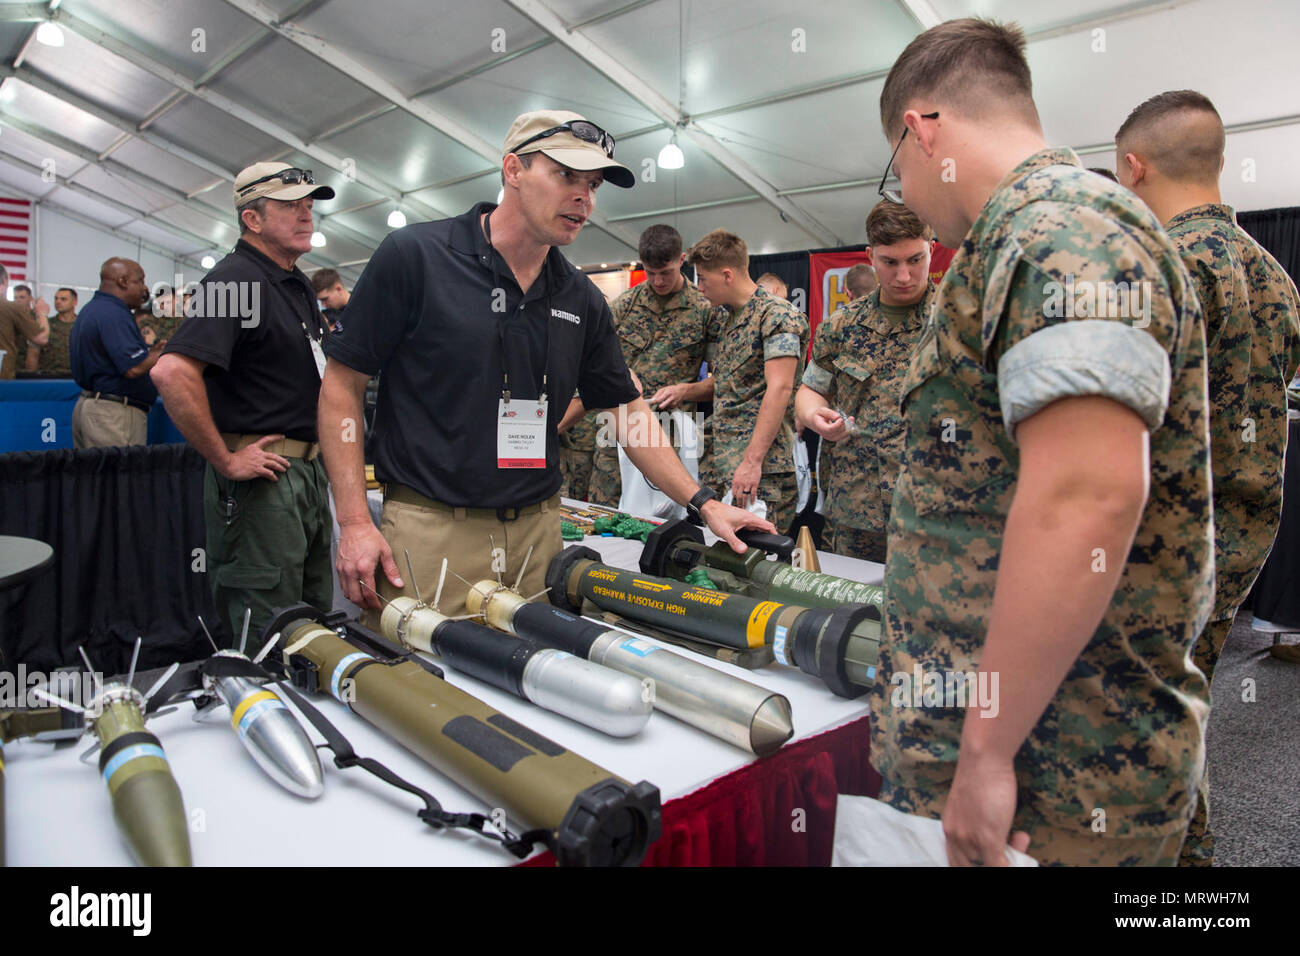 Dave Rolen, director of field marketing, Nordic Ammunition, explains different weapon systems to Marines and Sailors during the Marine South Military Exposition, Goettege Field House, Camp Lejeune N.C., April 13, 2017. The Marine South Exposition is sponsored by the Marine Corps League and is a forum for defense contractors to display, inform, and promote the latest in defense equipment and technology. Stock Photo